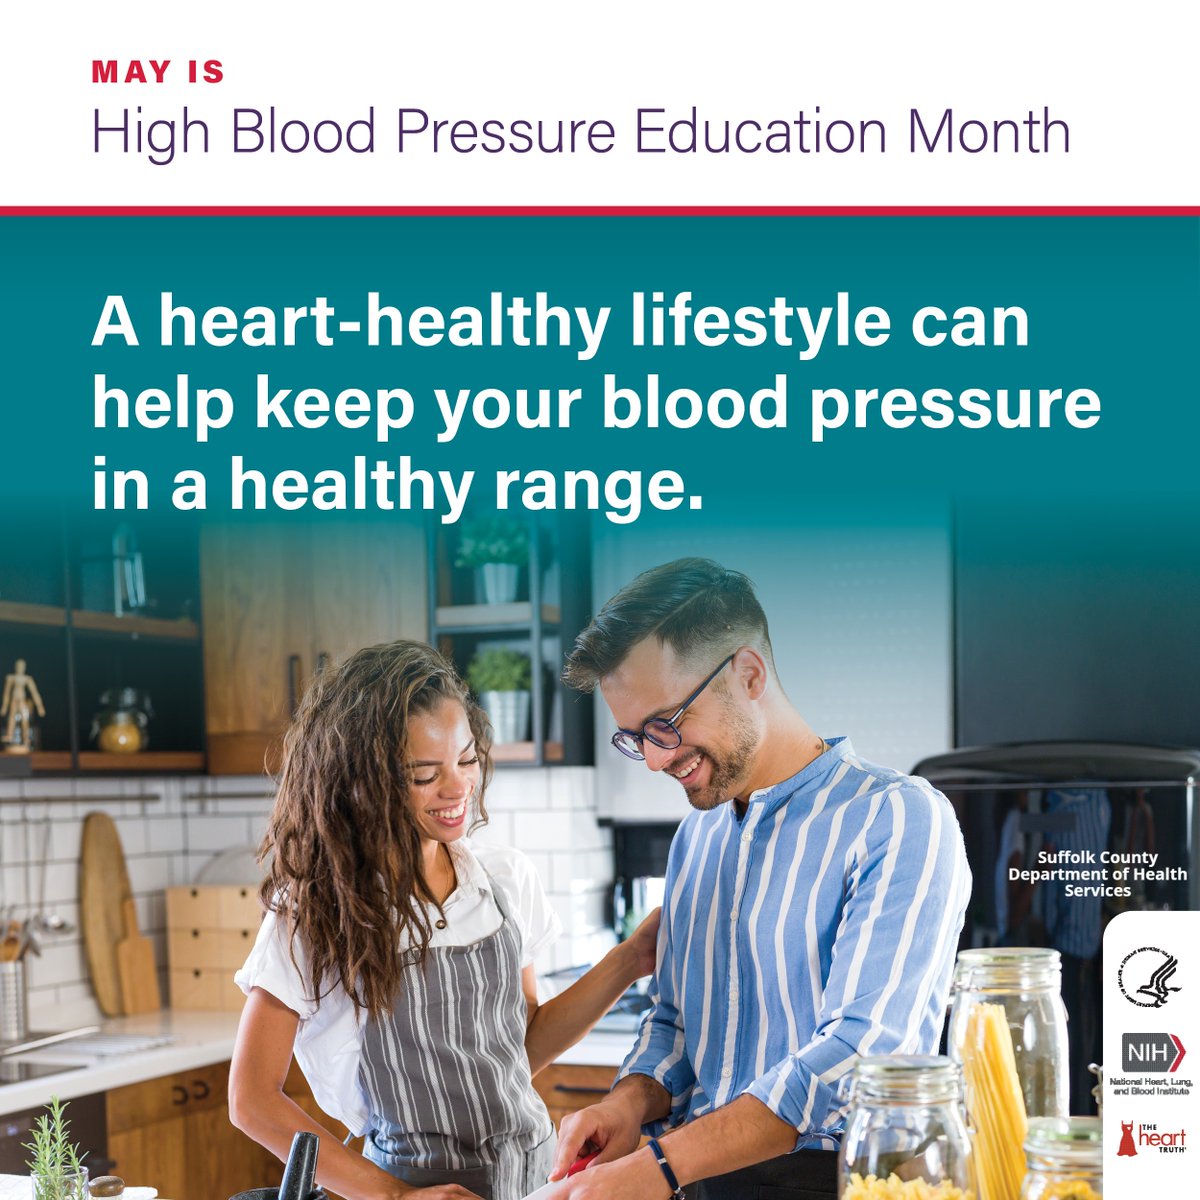 May is #HighBloodPressureMonth! Choosing and preparing foods that are lower in salt and sodium may help prevent or lower high blood pressure. Food labels can help you decide which foods to choose. Find tips on choosing low sodium foods: nhlbi.nih.gov/resources/choo…